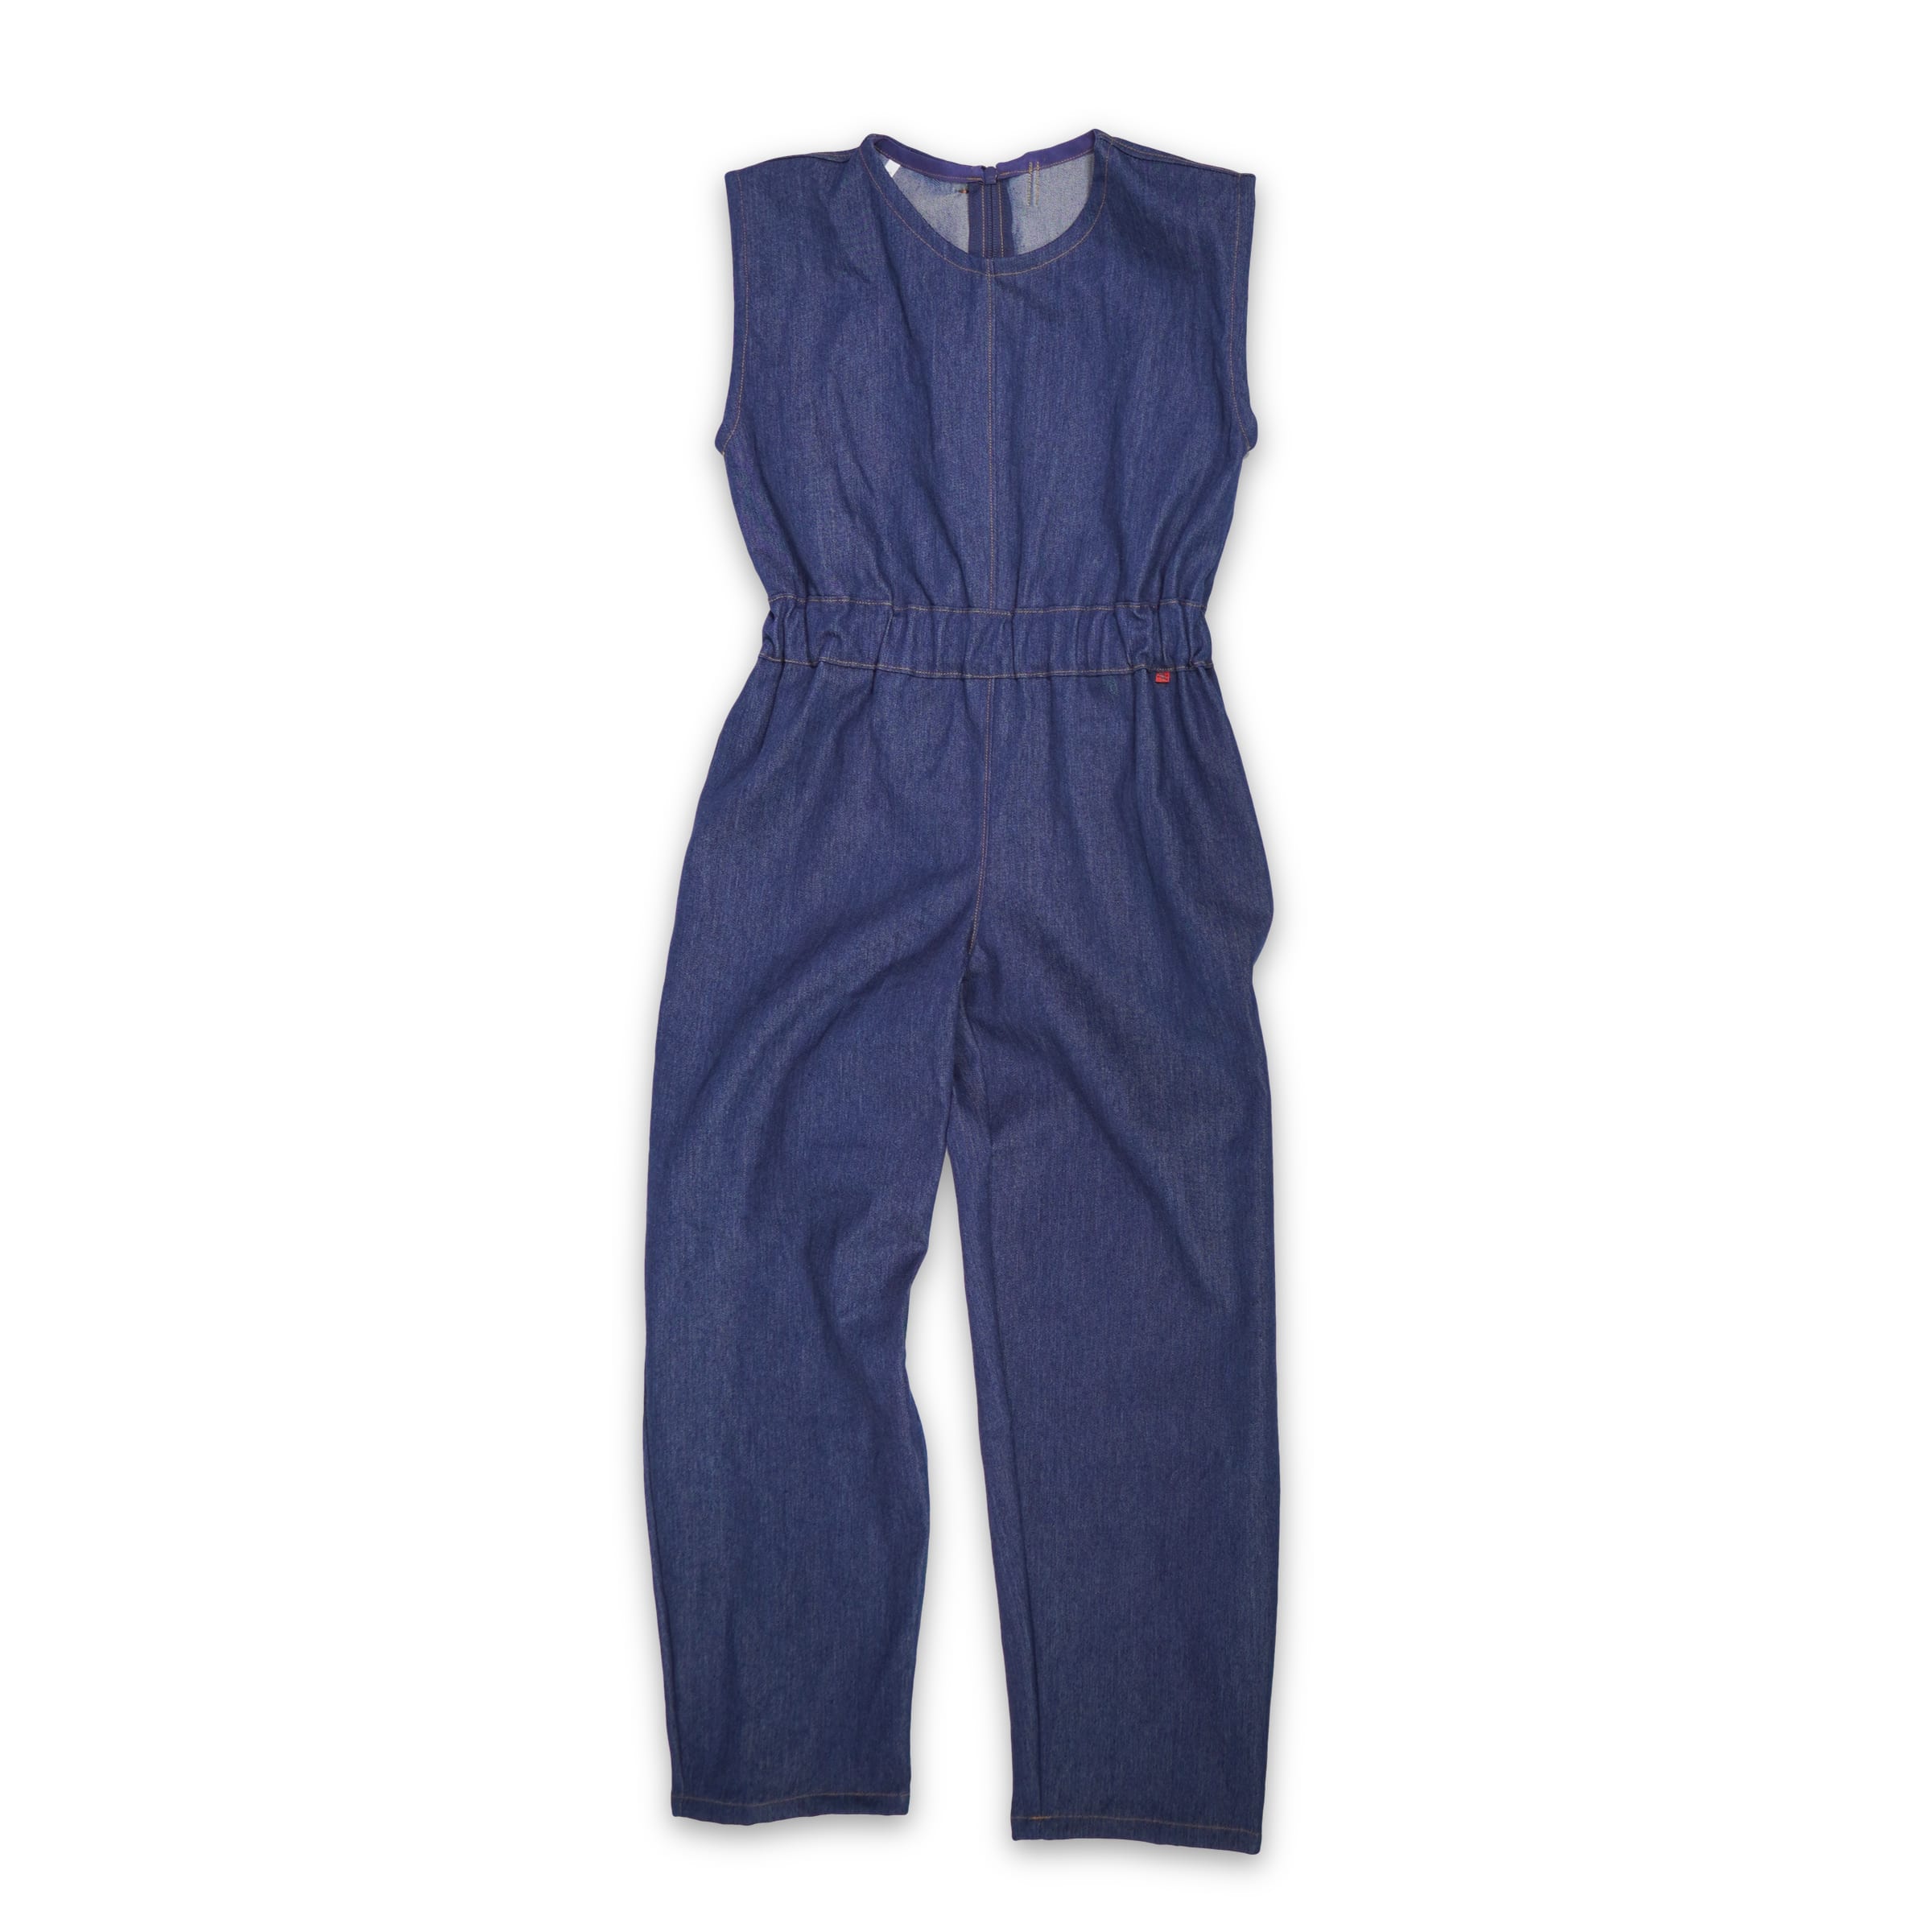 Stretchjeans Overall, blau